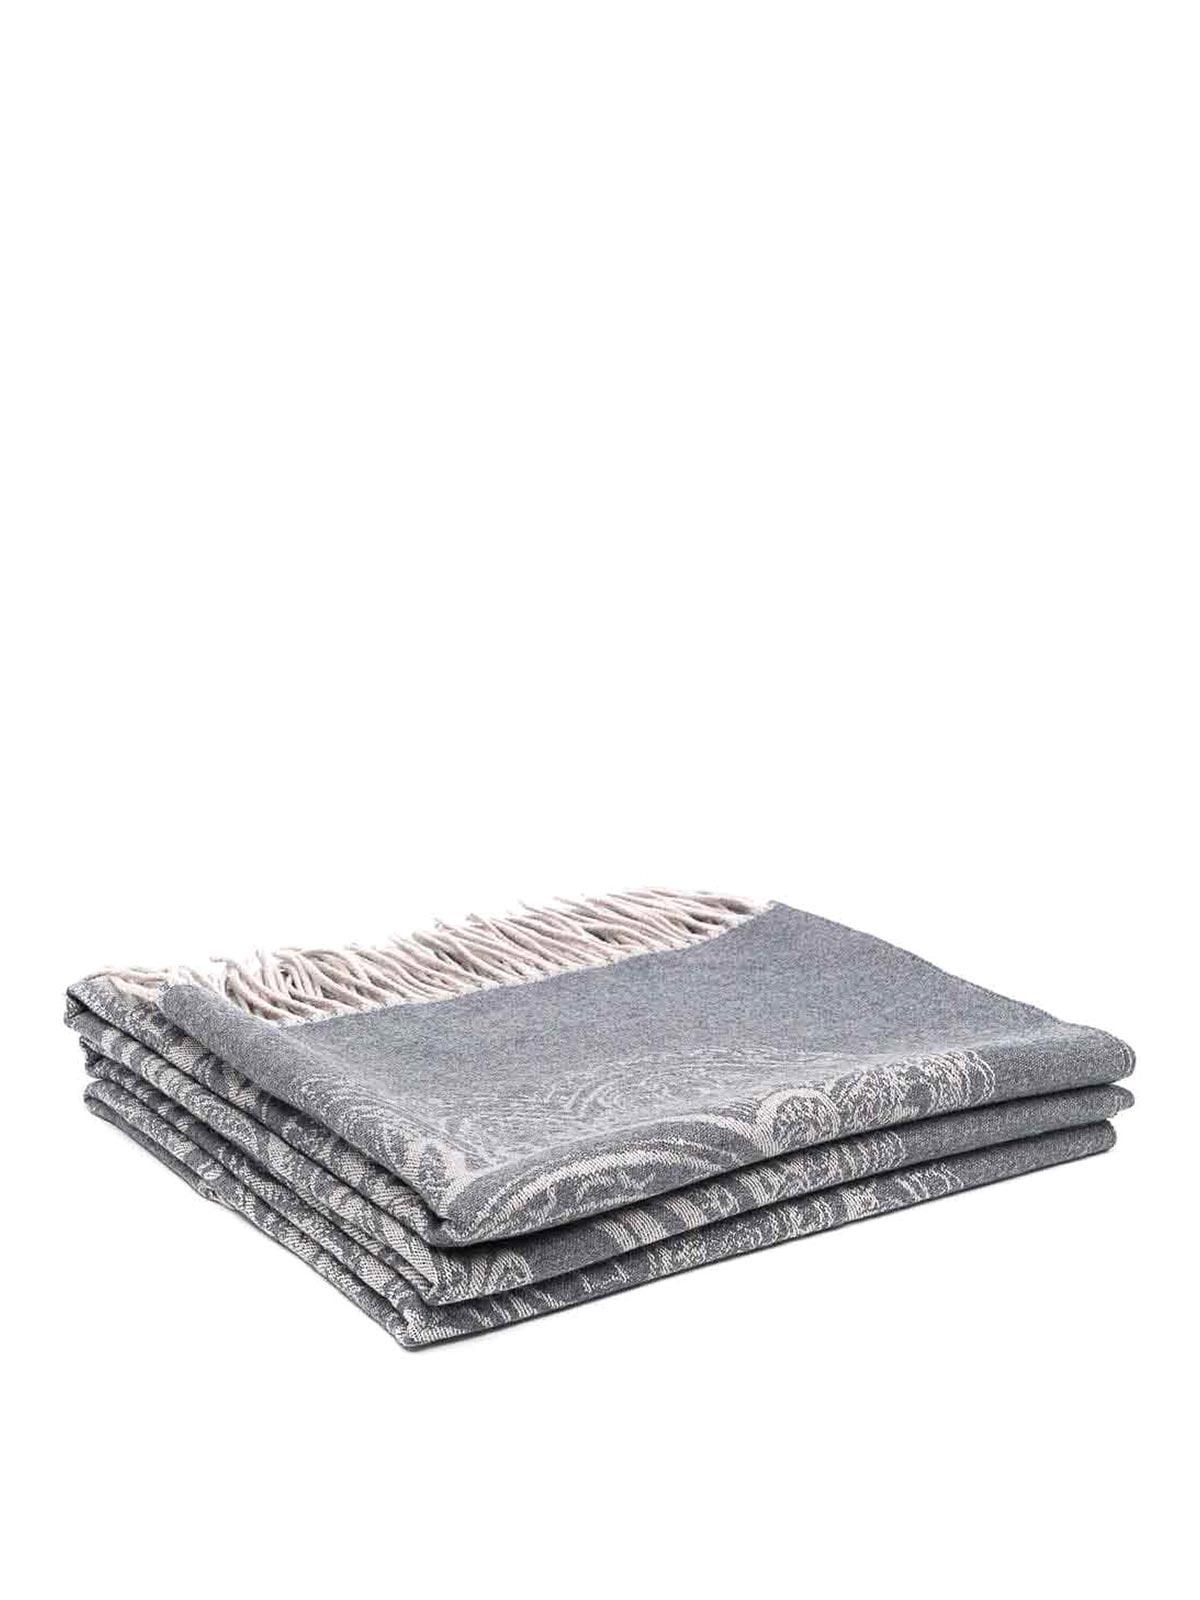 Delicate framed jacquard pattern, 100% wool through, gorgeous gray, dual side; Fringed edges, Dimensions: 55